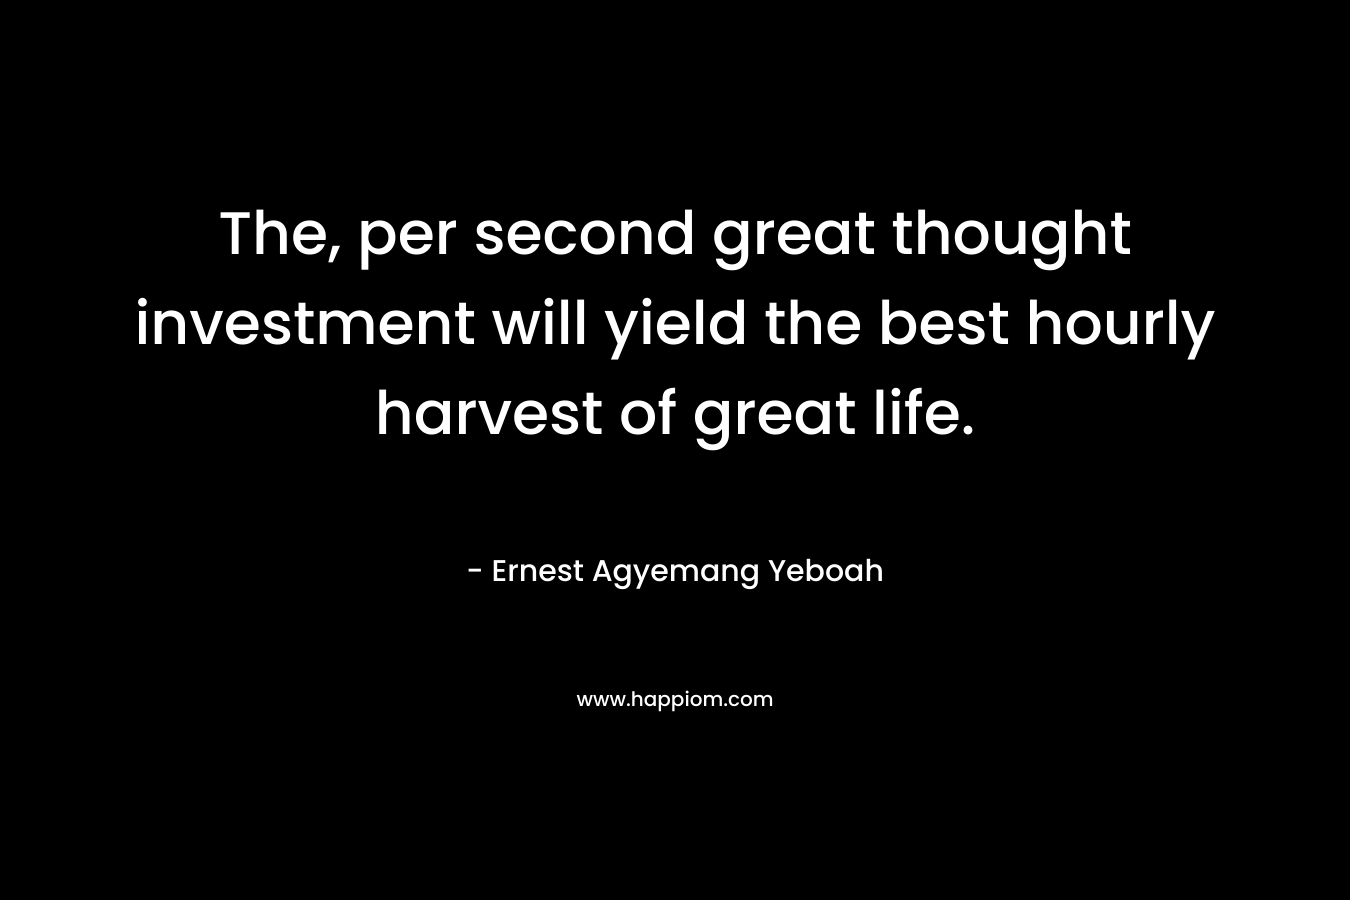 The, per second great thought investment will yield the best hourly harvest of great life.